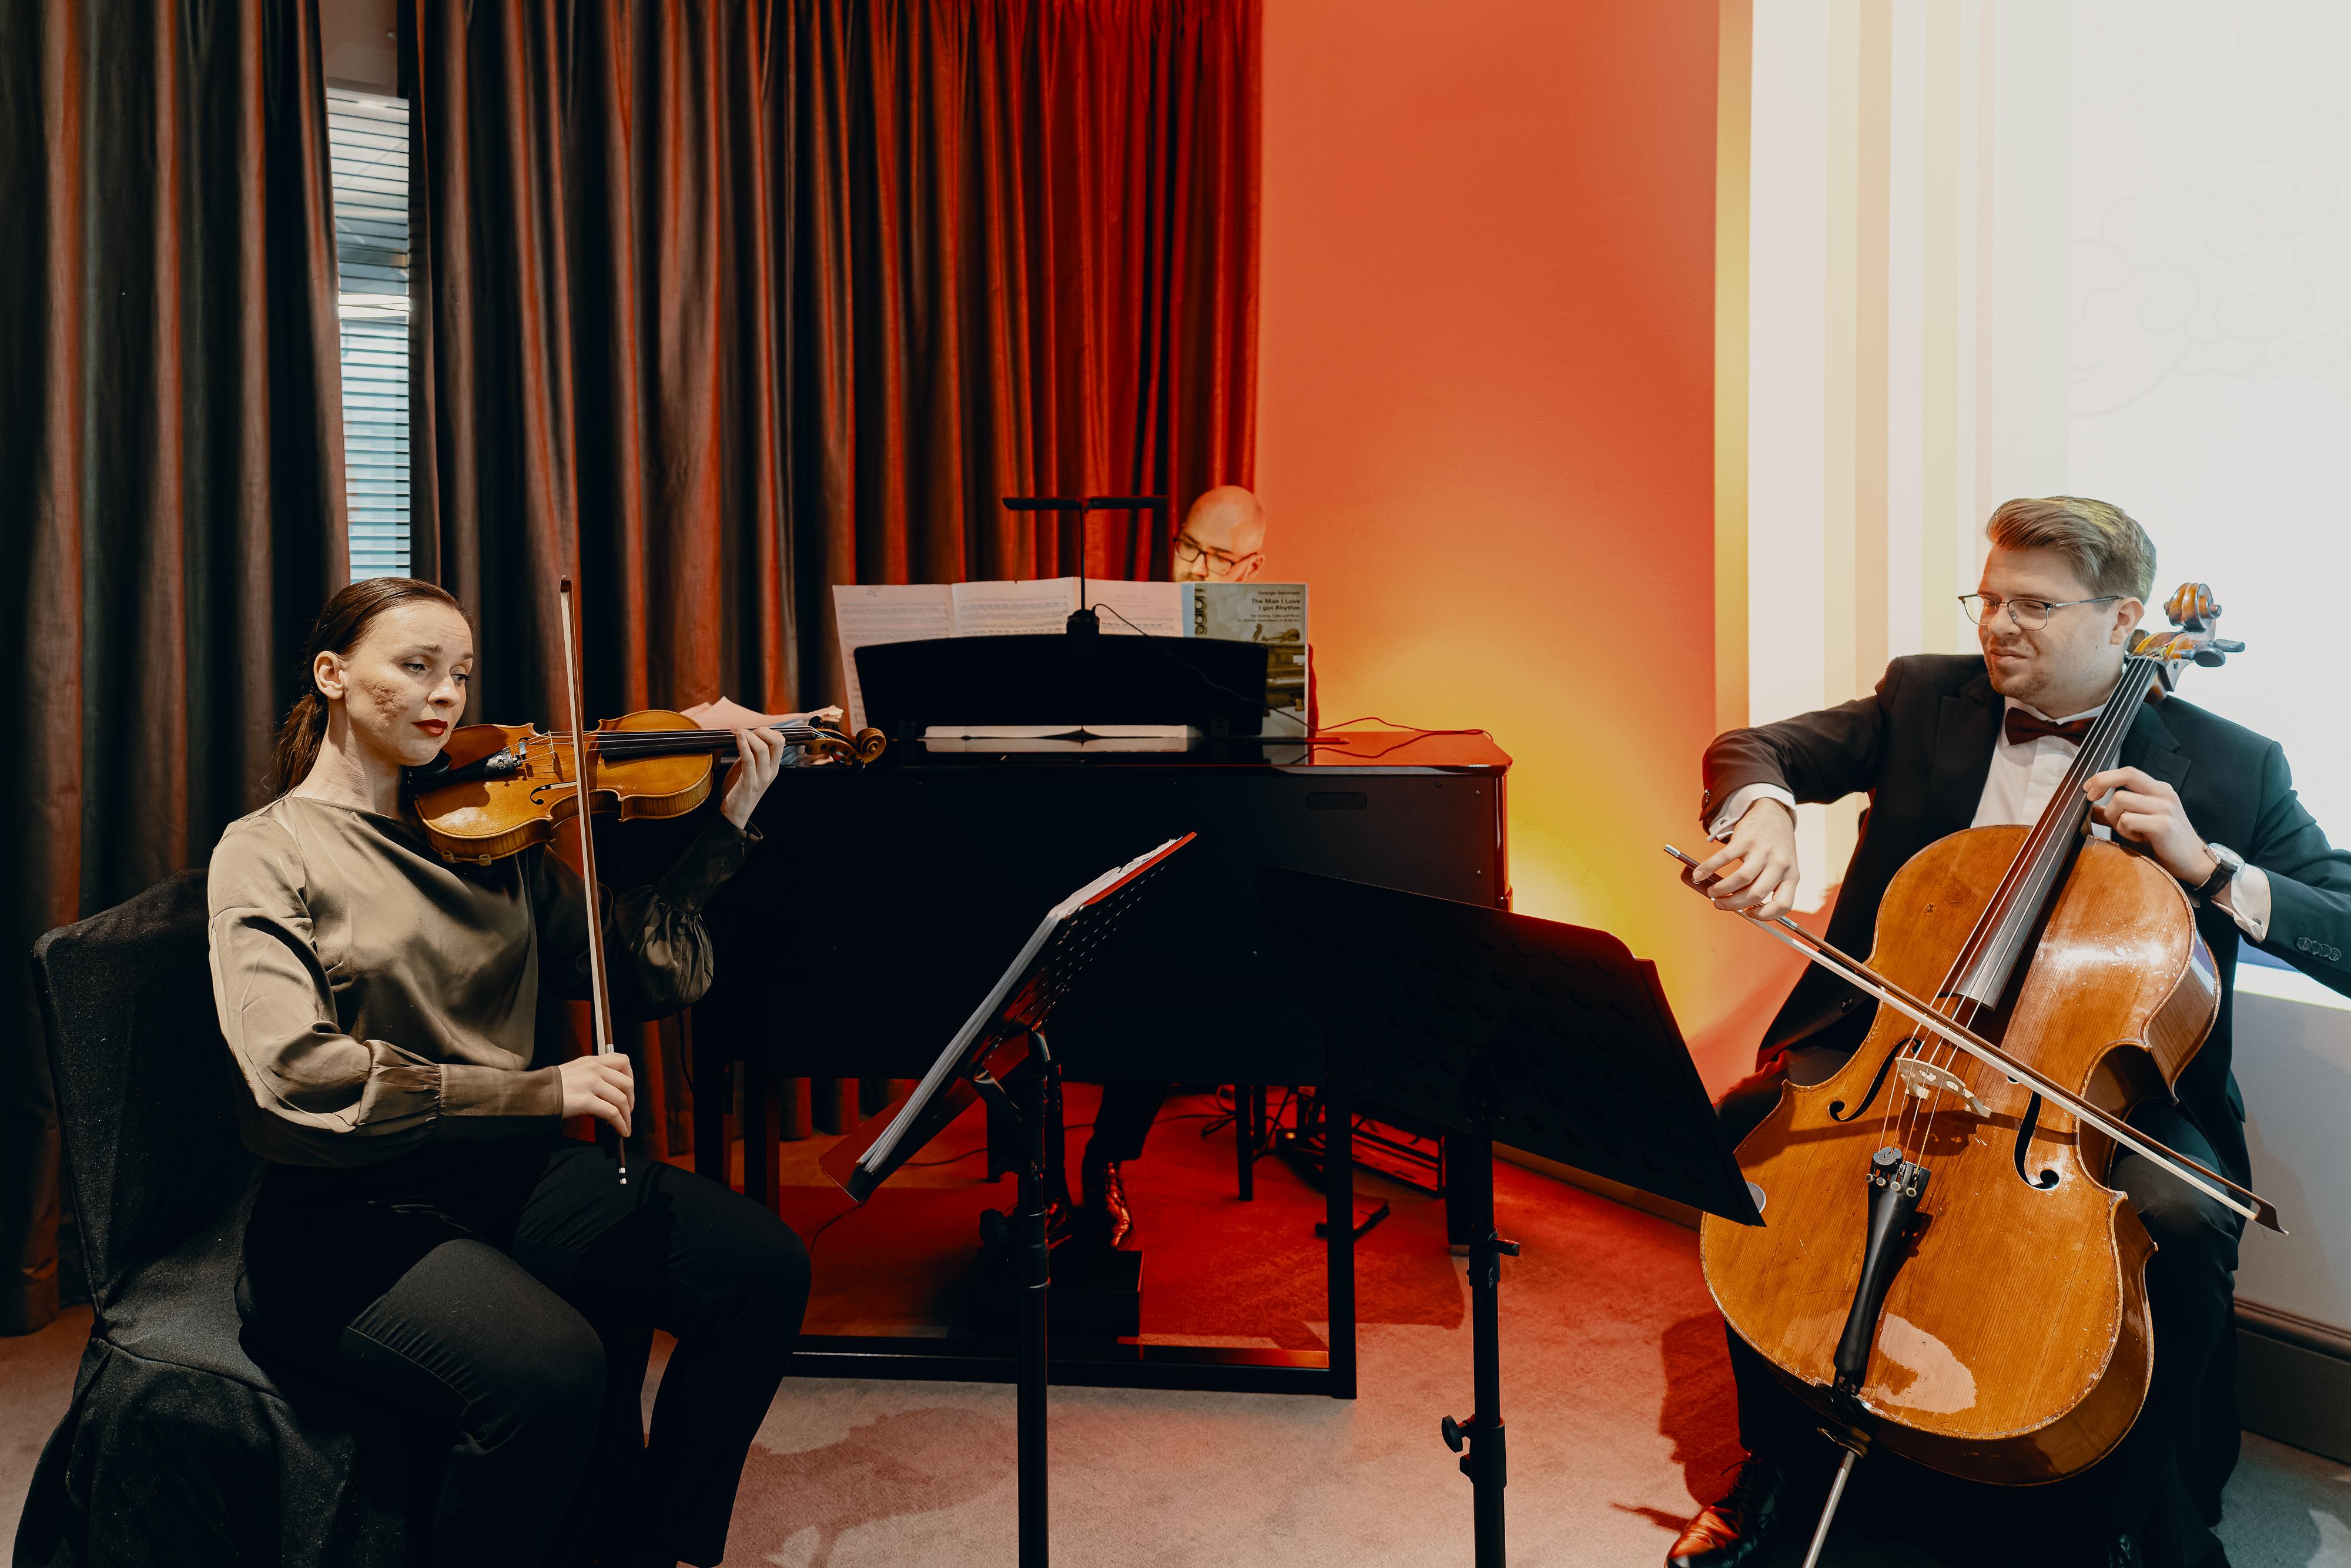 The Hong Kong Economic and Trade Office, London co-hosted receptions in Oslo, Norway, and Helsinki, Finland, with local business associations on January 30 and February 1 respectively for celebrating the Year of the Rabbit. Photo shows the music performance at the Helsinki reception.